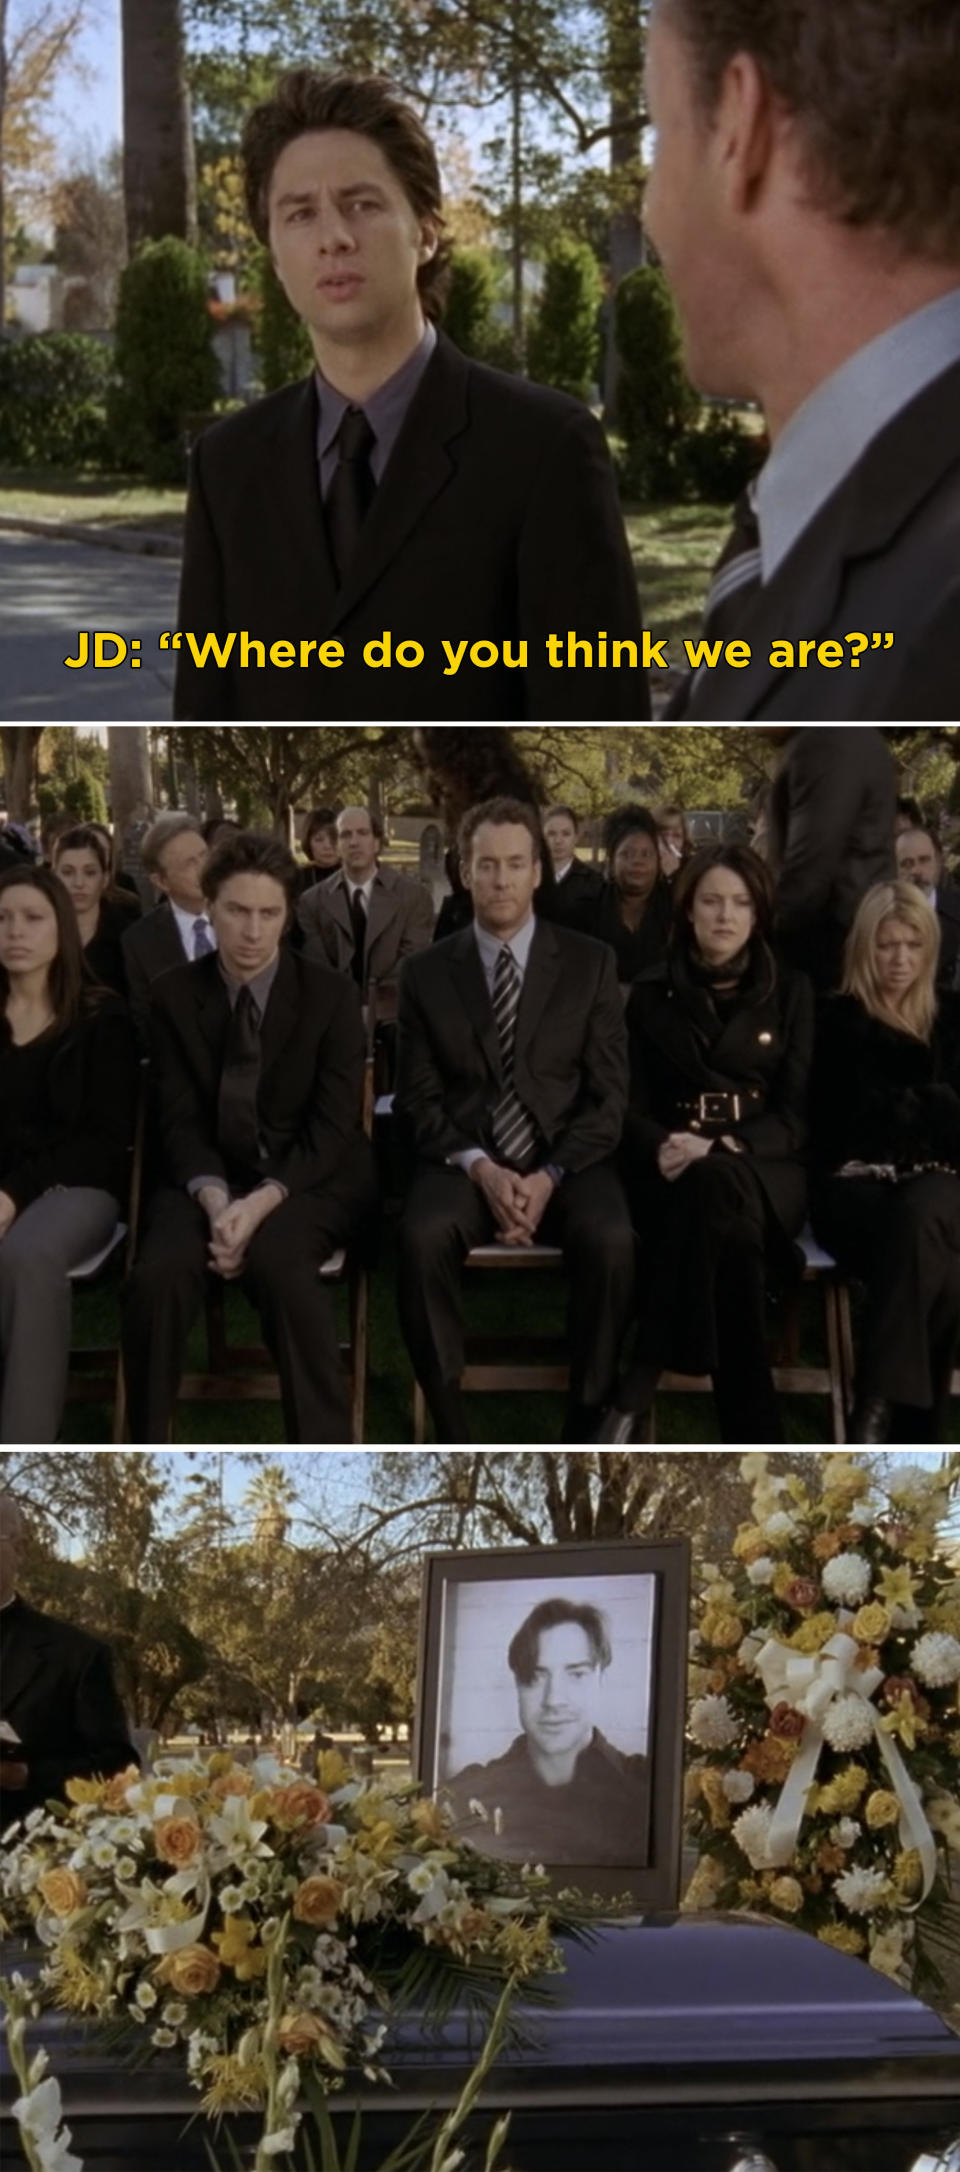 Man asks another, "Where do you think we are?" and they're at a funeral